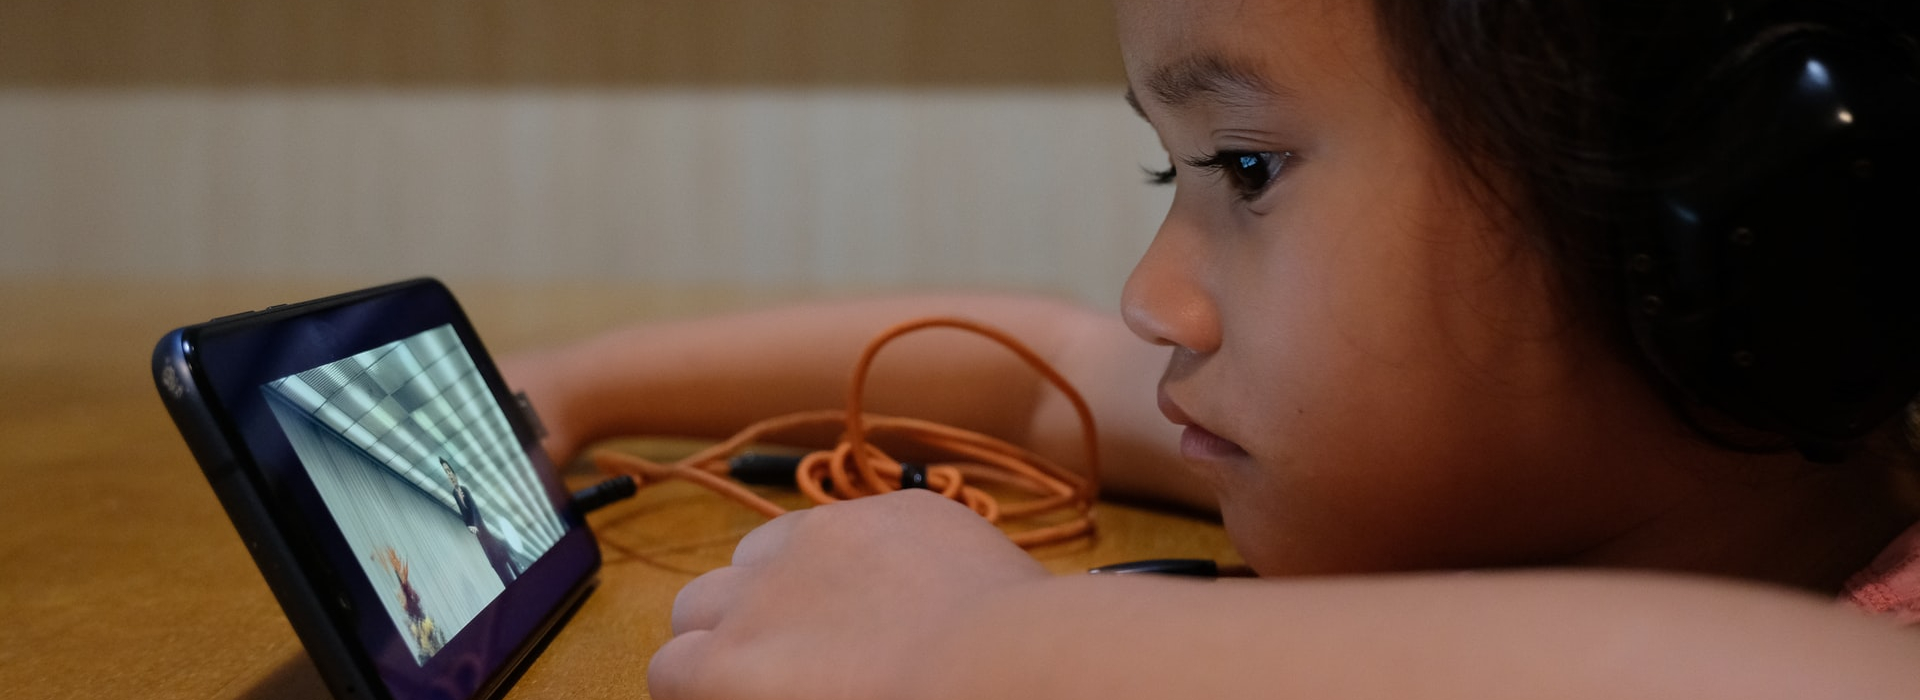 Playing IT Safe: developing young children’s understanding of digital networks